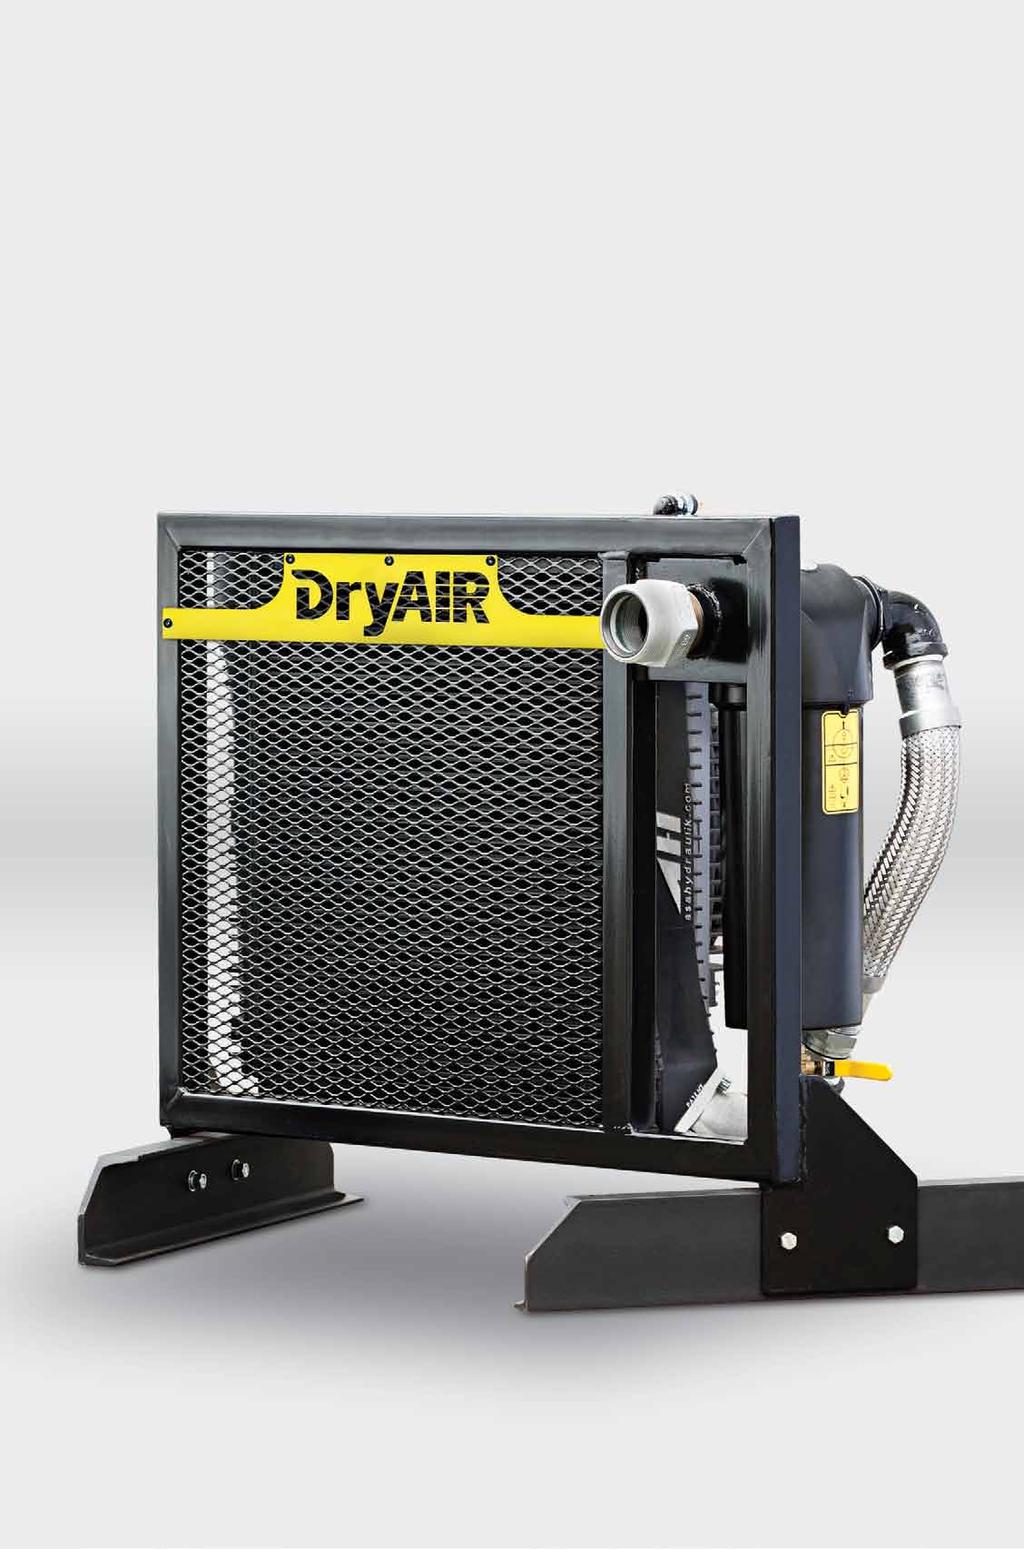 400FS/TM FREESTANDING or TONGUE-MOUNT 24-Volt DC, Air-Cooled The DryAir 400FS/TM has been designed as a stand-alone or tongue-mount aftercooler for mid-size portable diesel compressors.